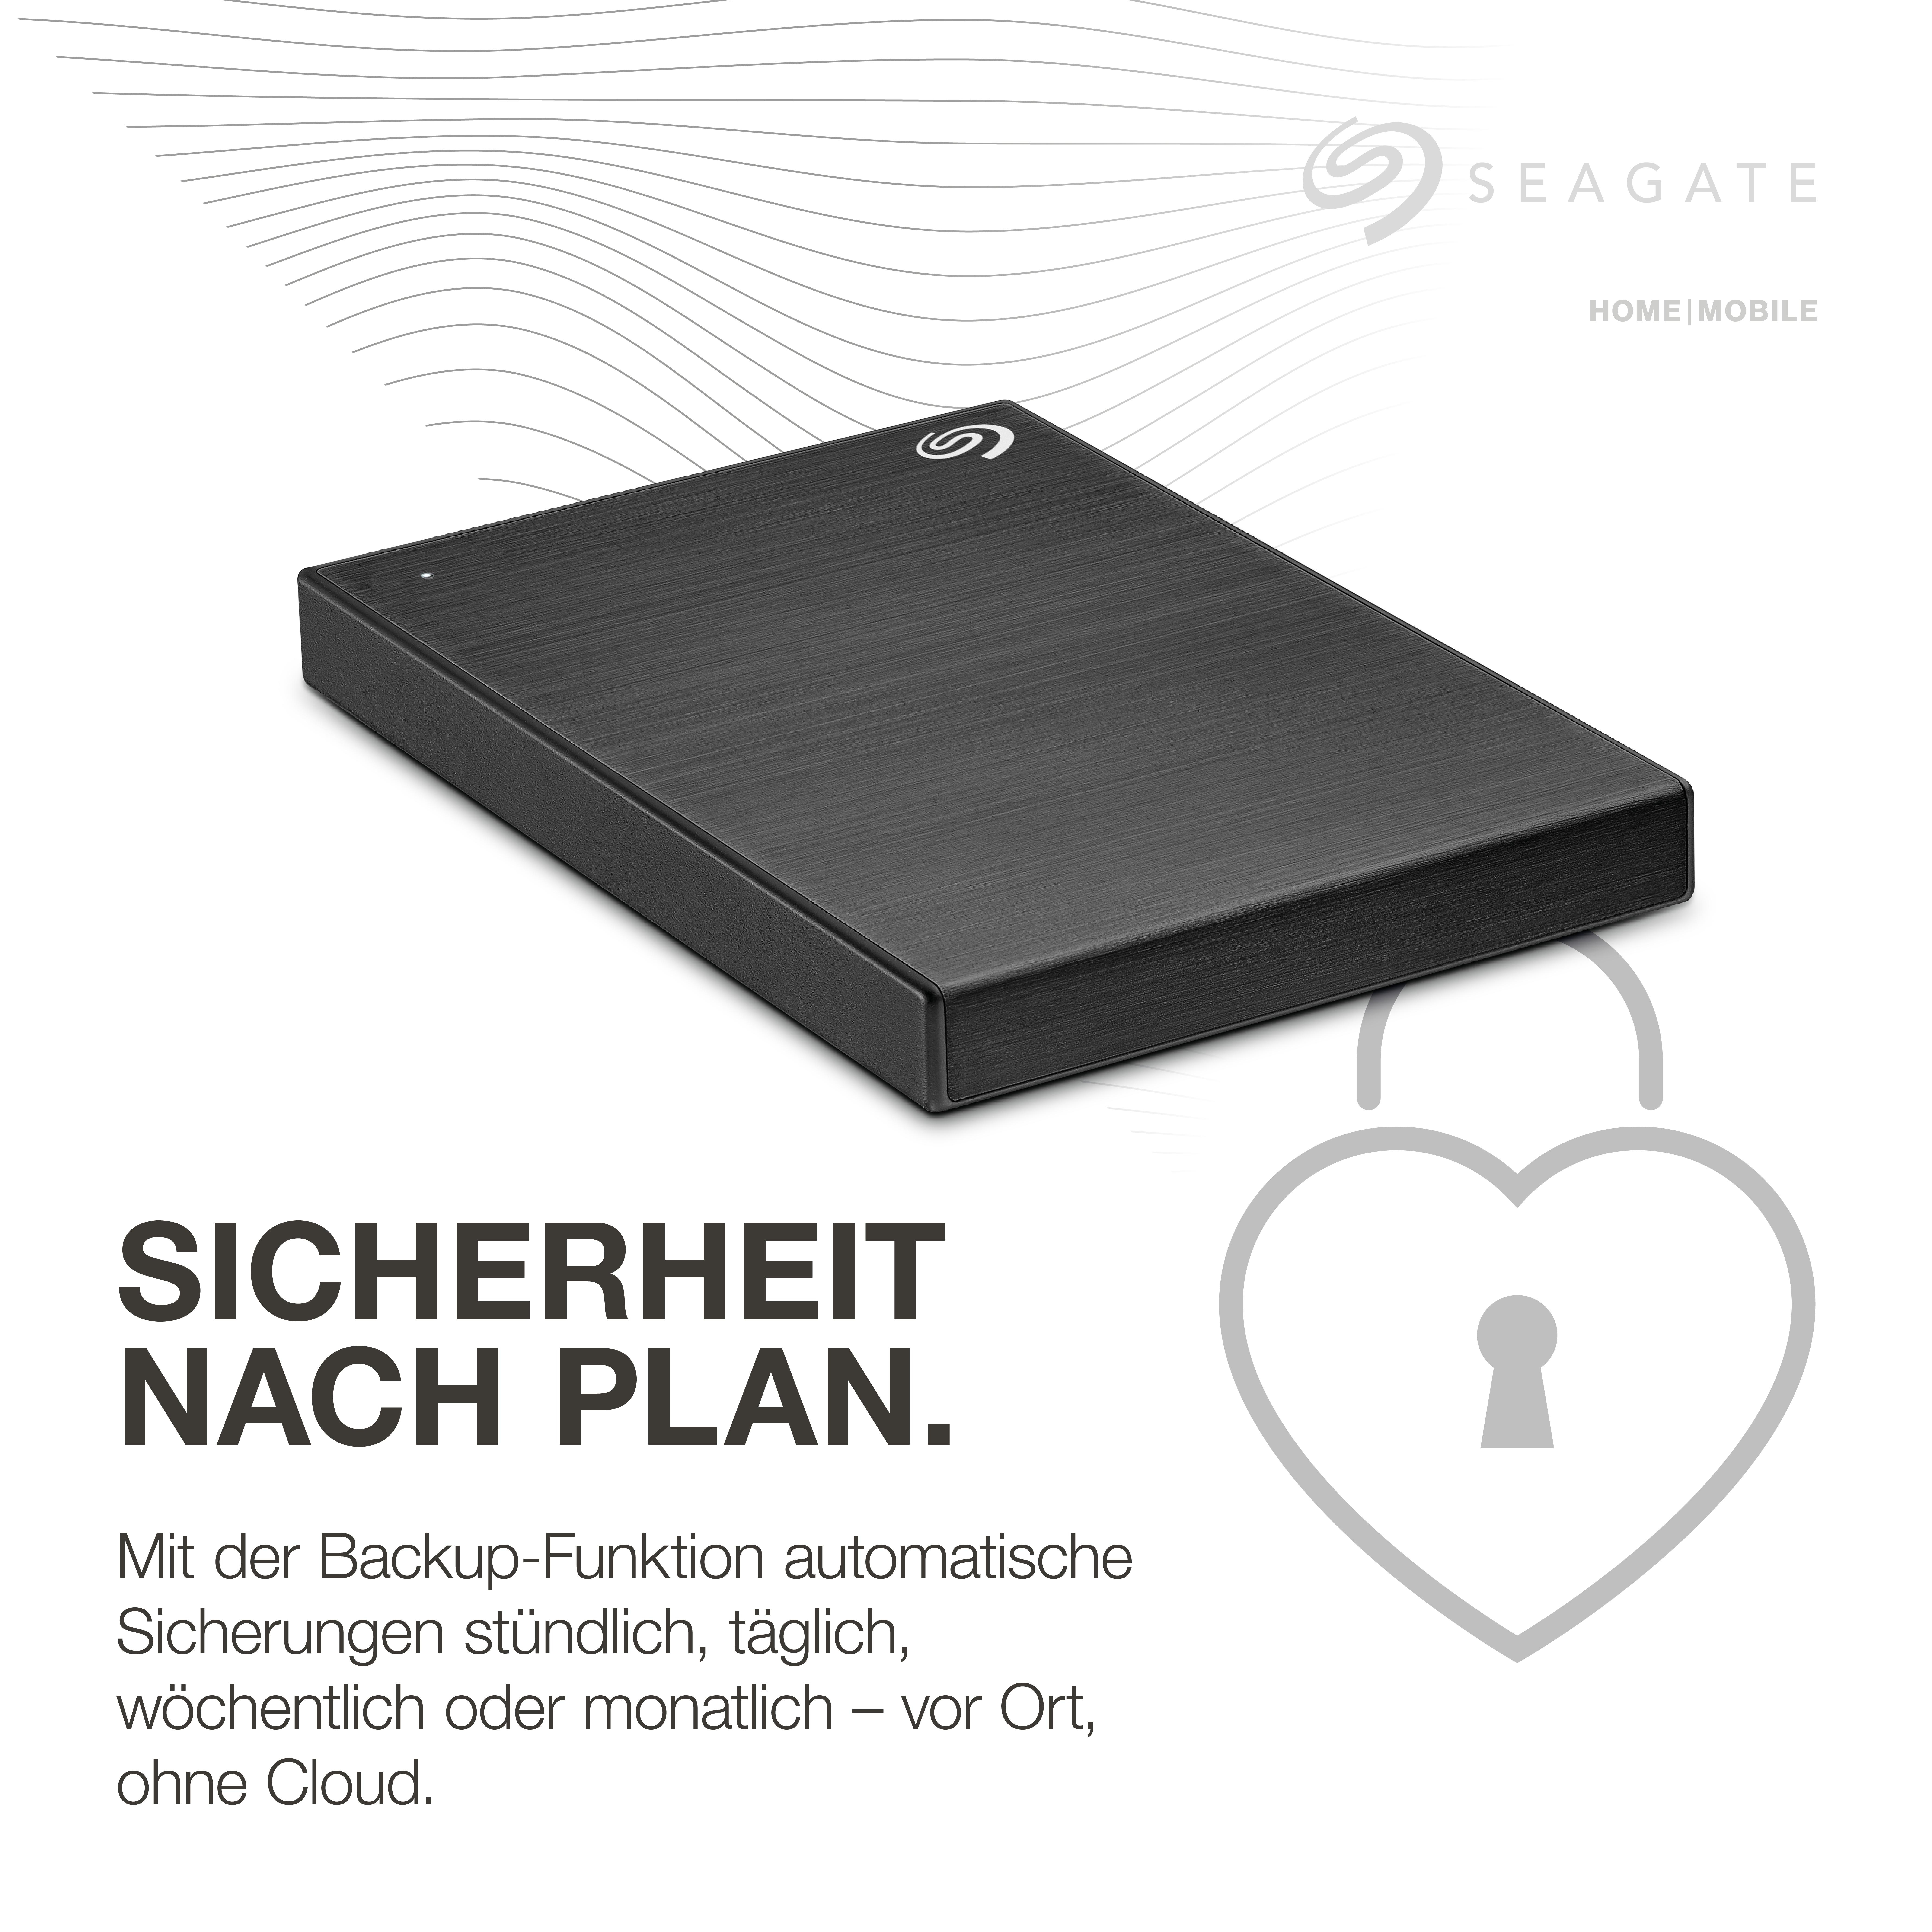 TB Schwarz extern, HDD, One Festplatte, 2,5 mobile Zoll, Touch 1 SEAGATE